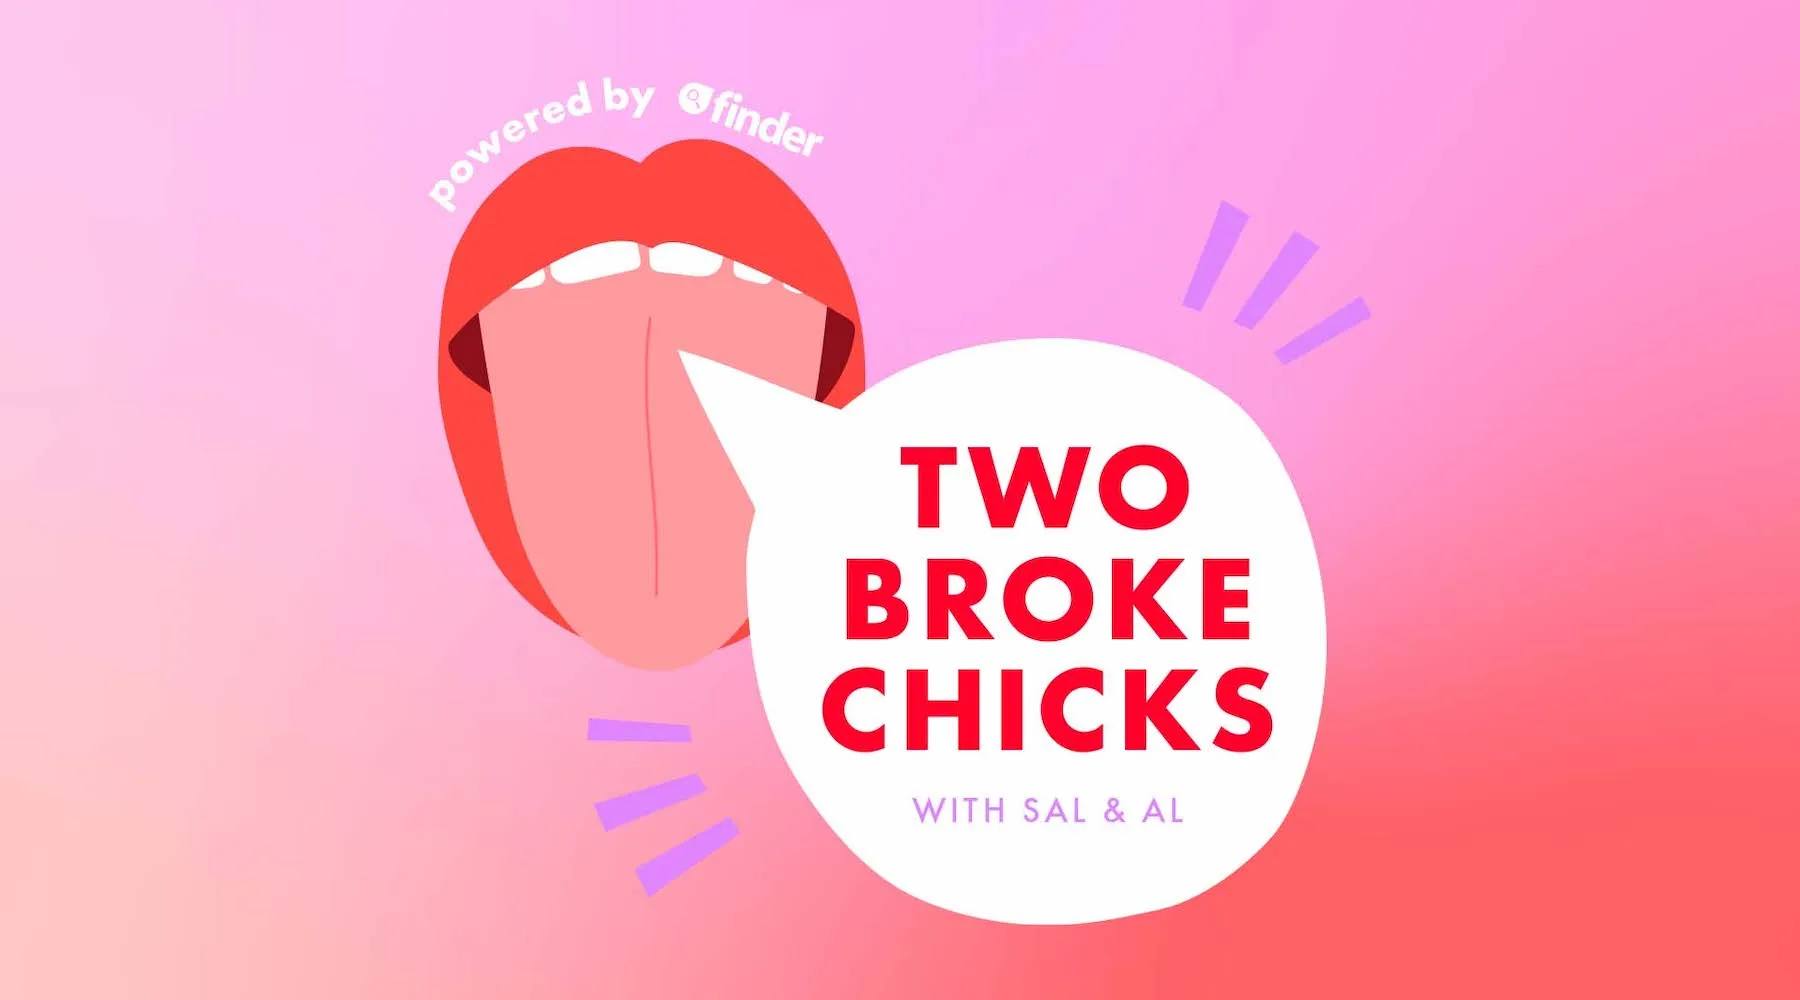 Two Broke Chicks podcast logo on pink and red gradient background.